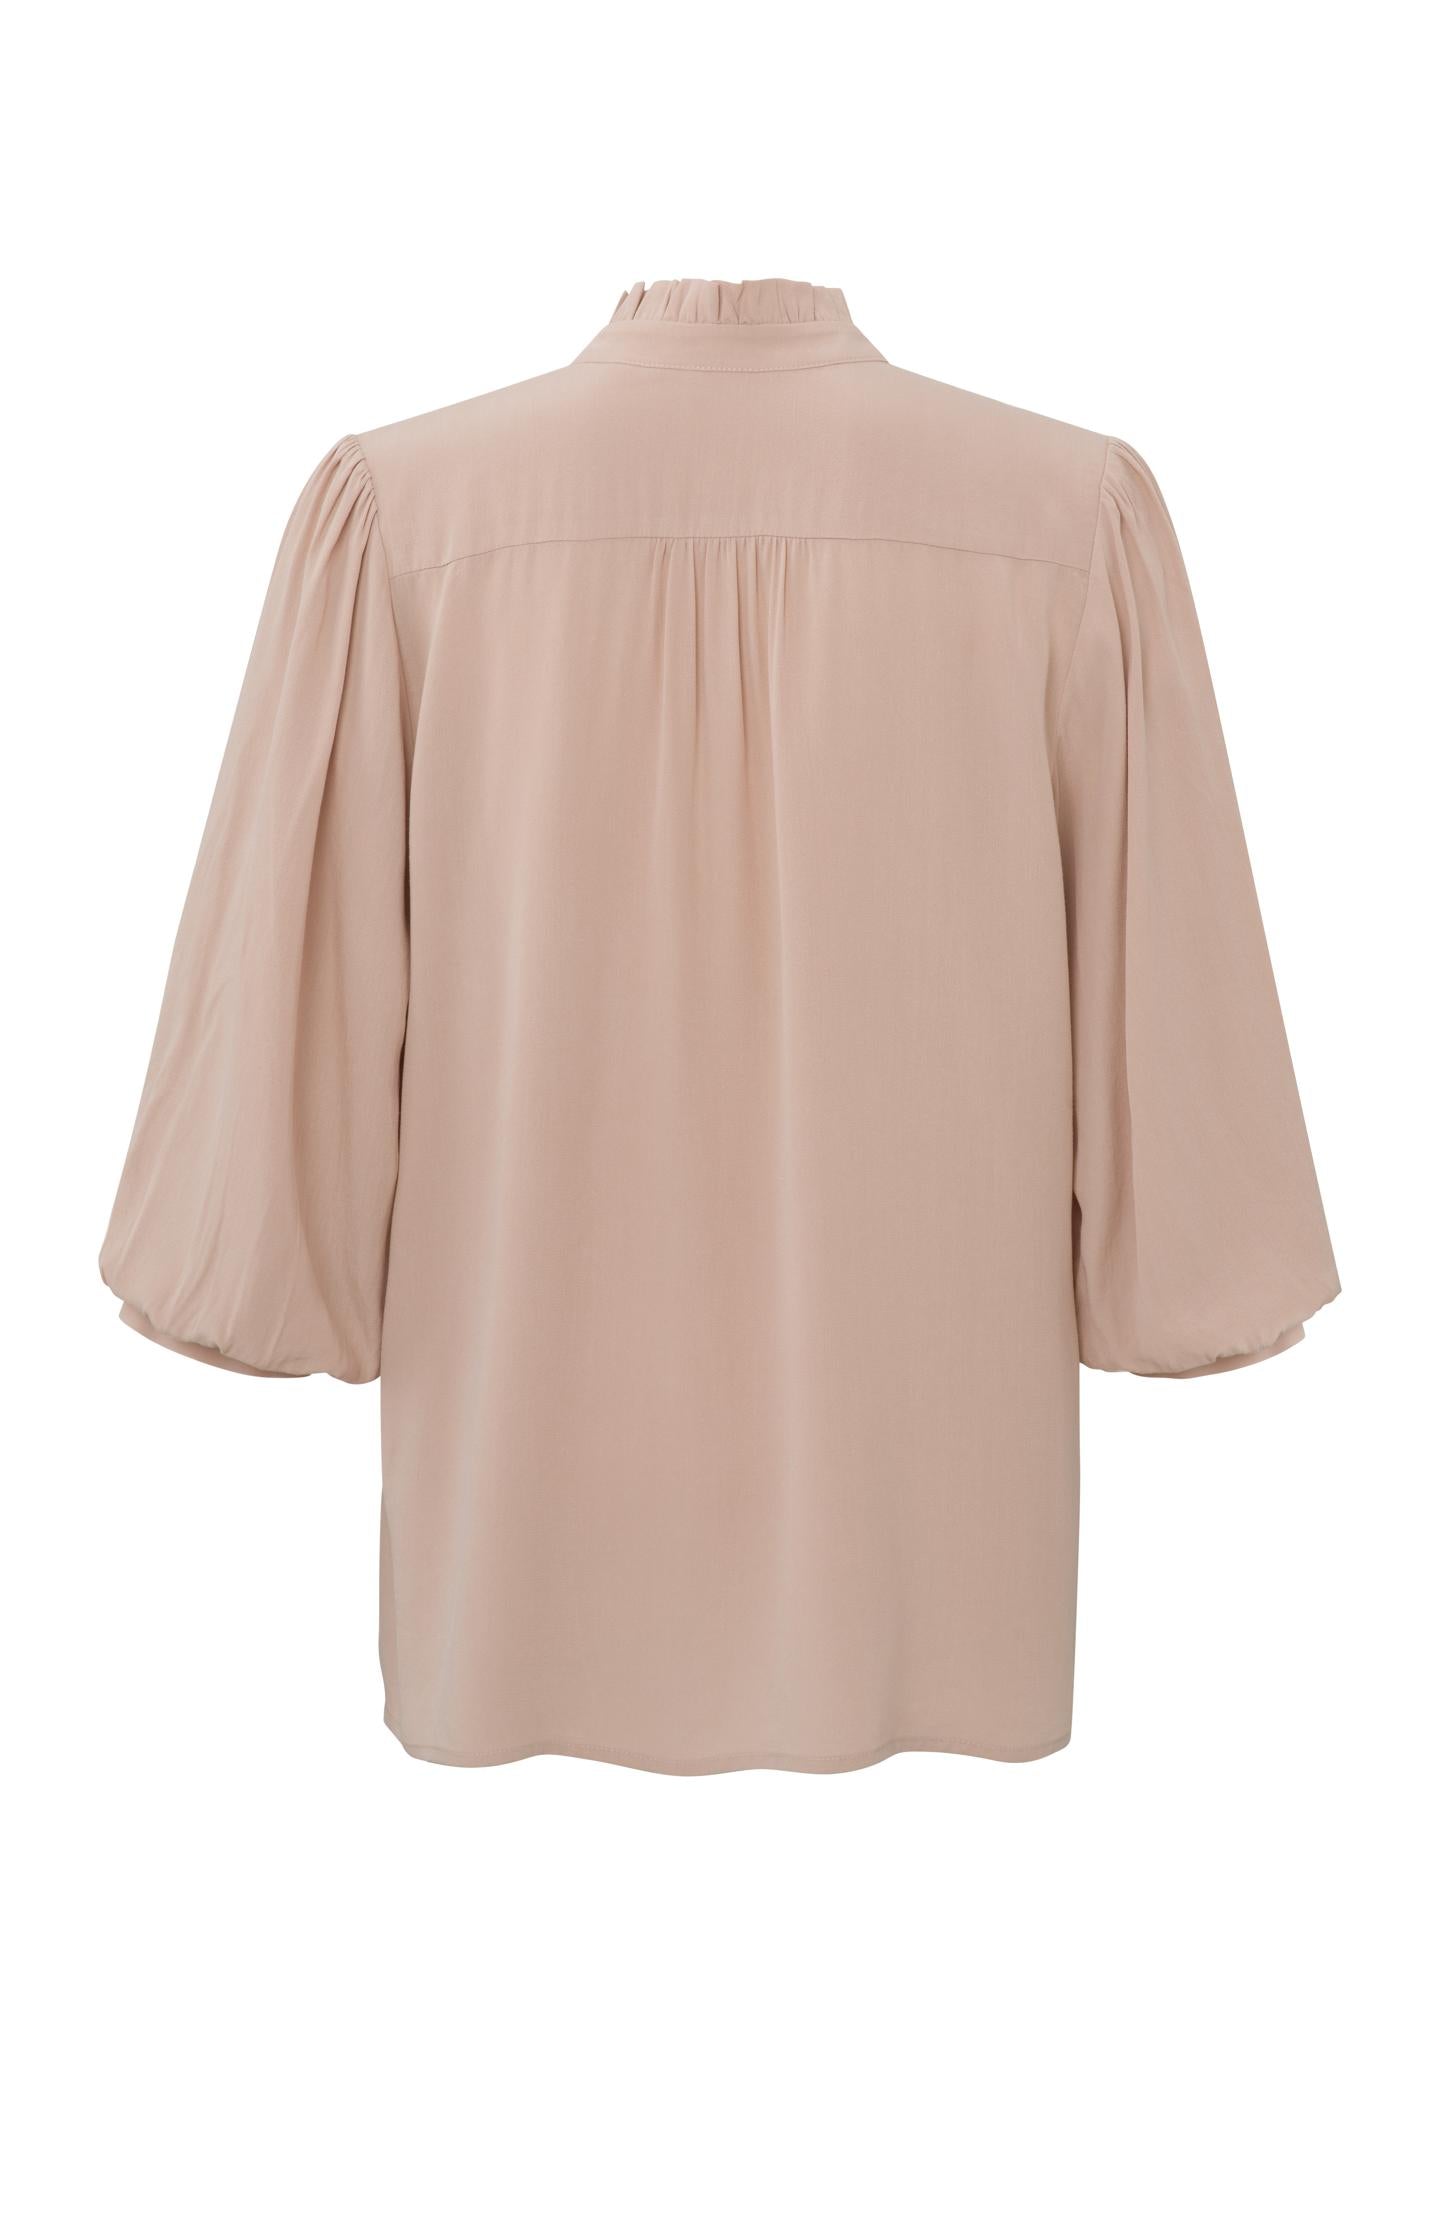 Blouse with half-long sleeves, a ruffled neck and buttons